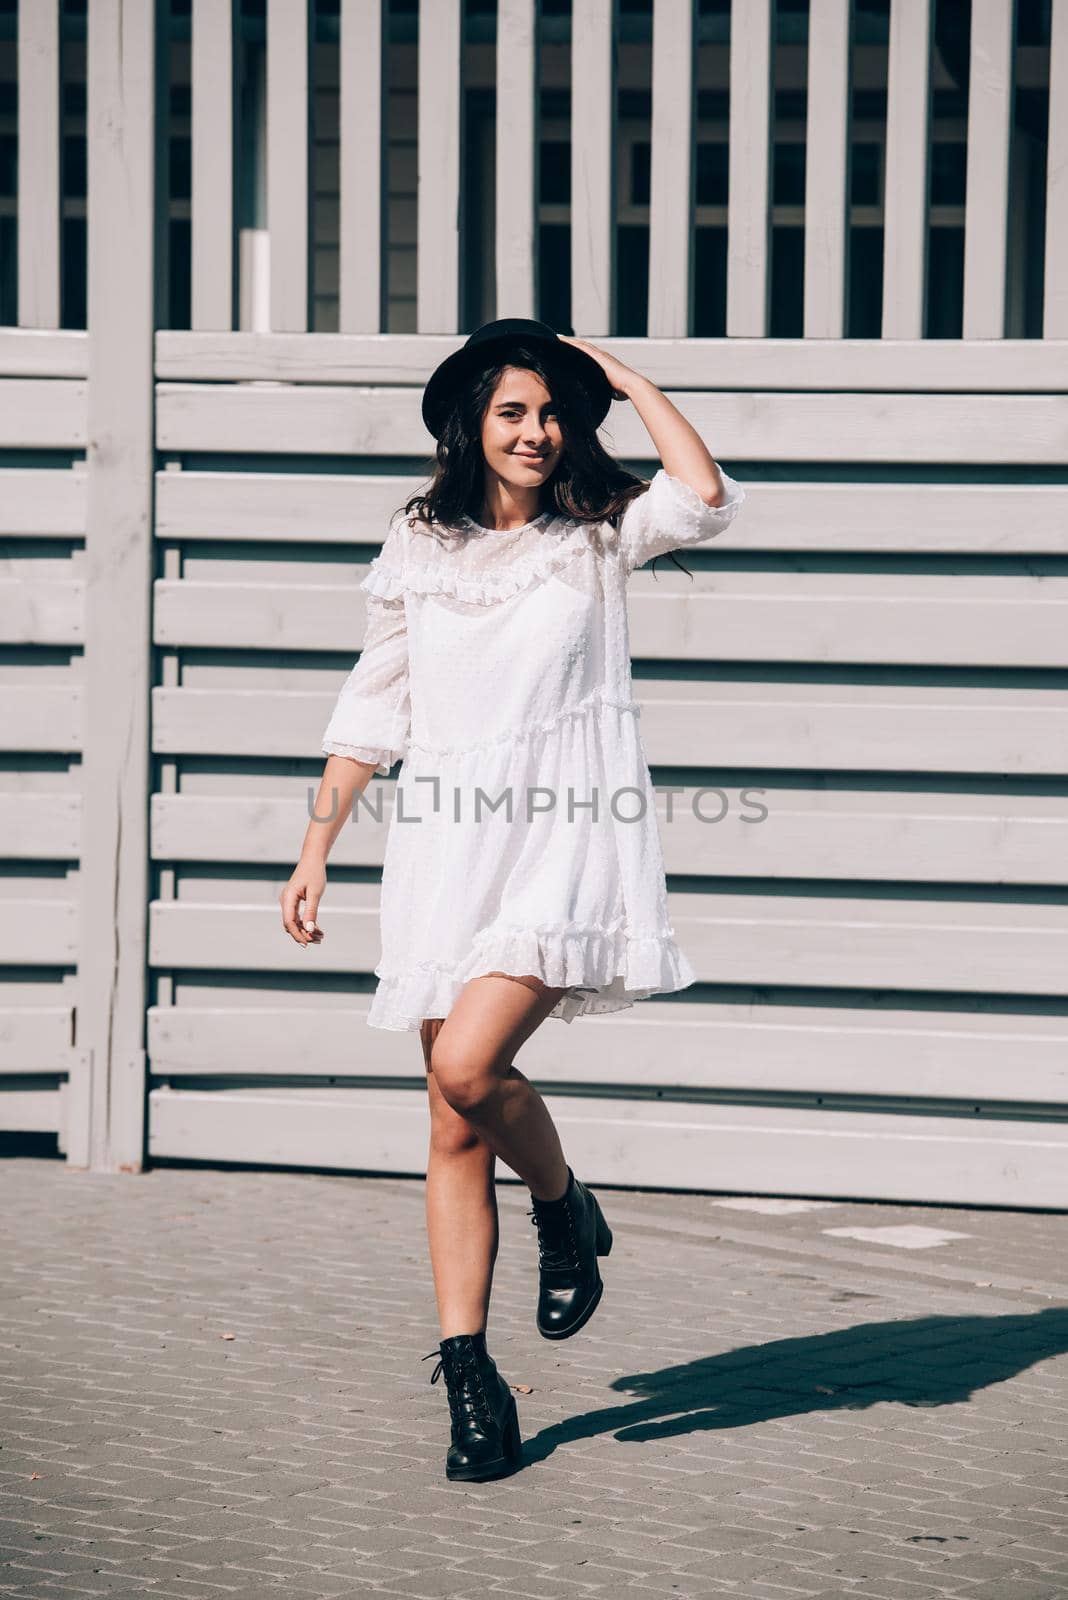 Sunny lifestyle fashion portrait of young stylish hipster woman walking on the street, wearing trendy white dress, black hat and boots. Gray wooden backgrond.